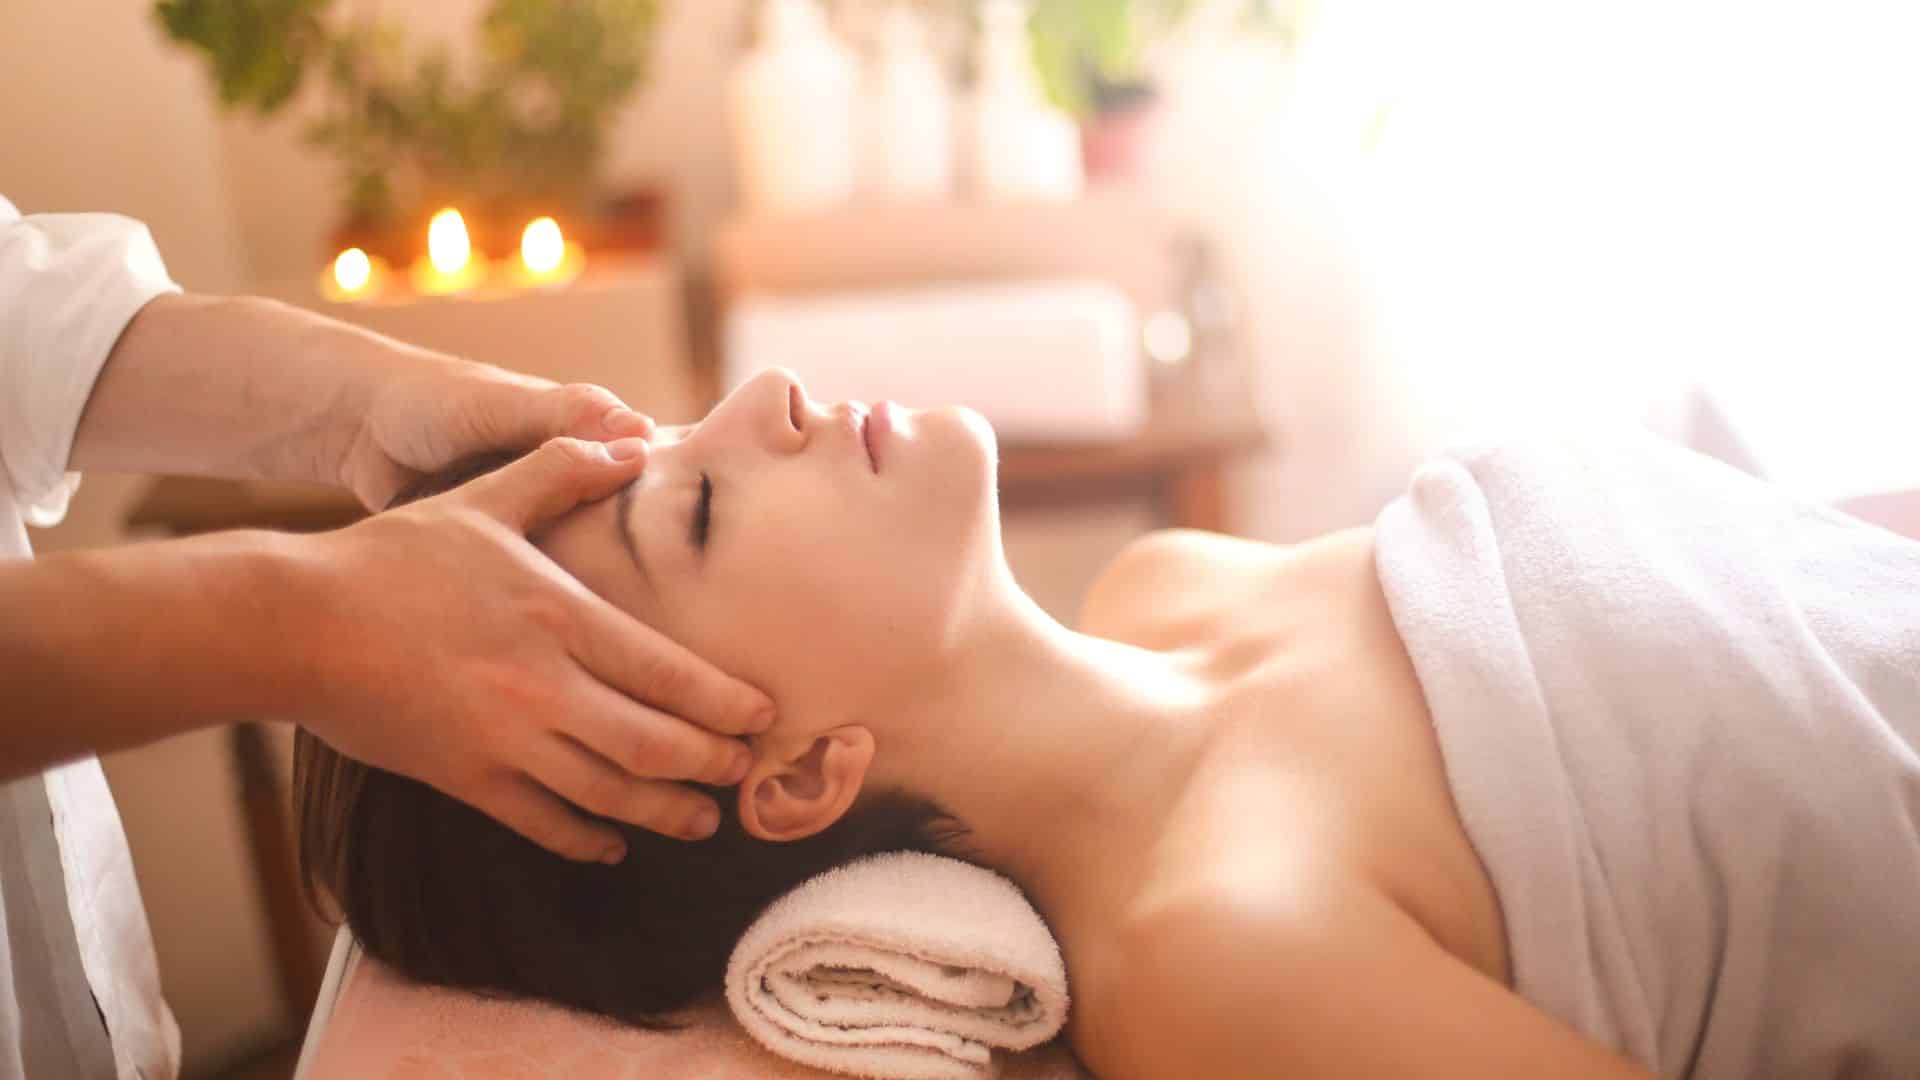 woman with brown hair wearing a white towel receiving a forehead massage with plants, lotions, and candles in the background